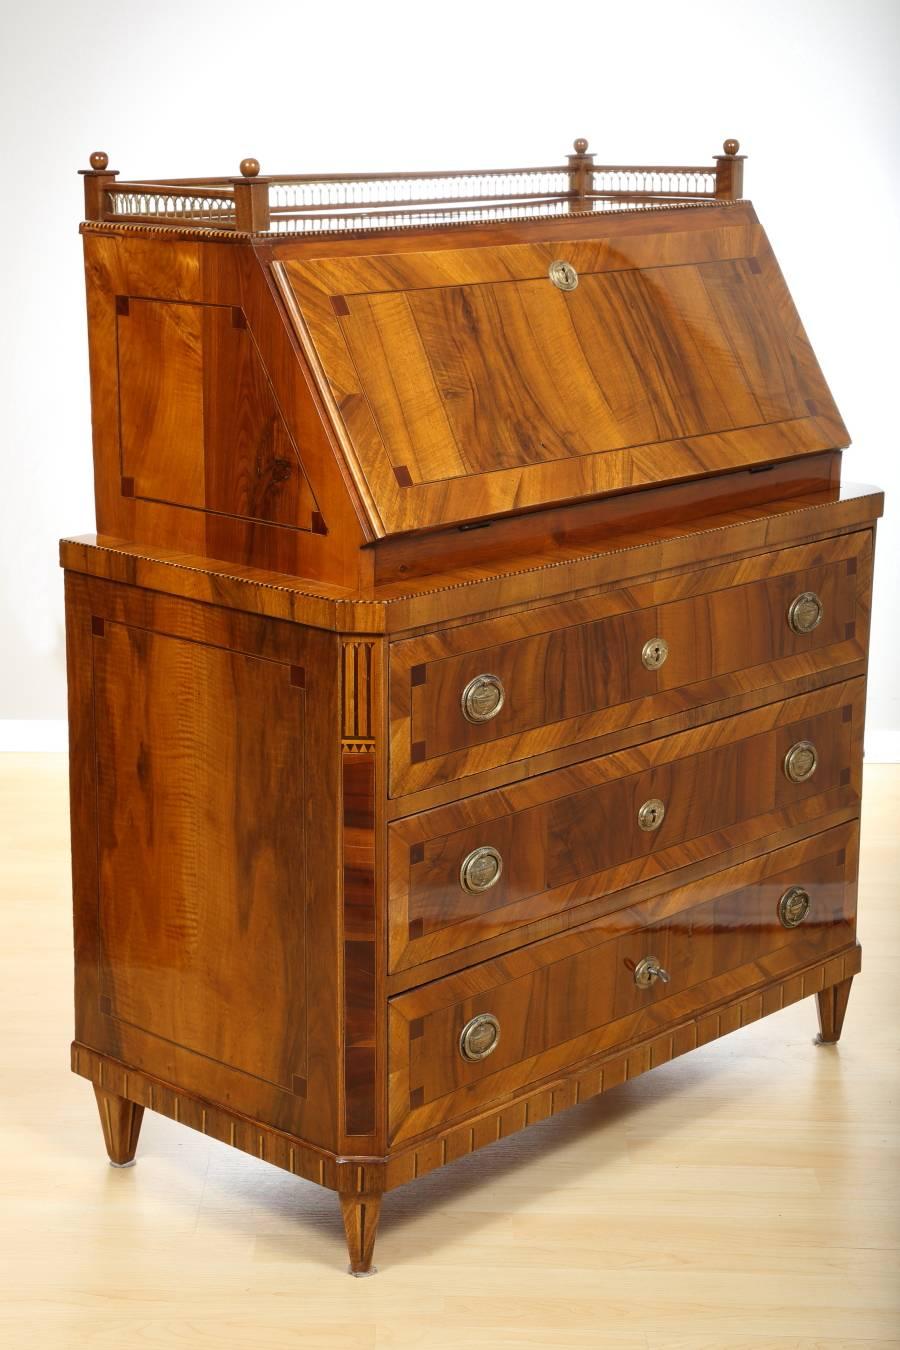 Early 19th Century Empire Fall-Front Secretaire in Walnut, circa 1810 For Sale 6